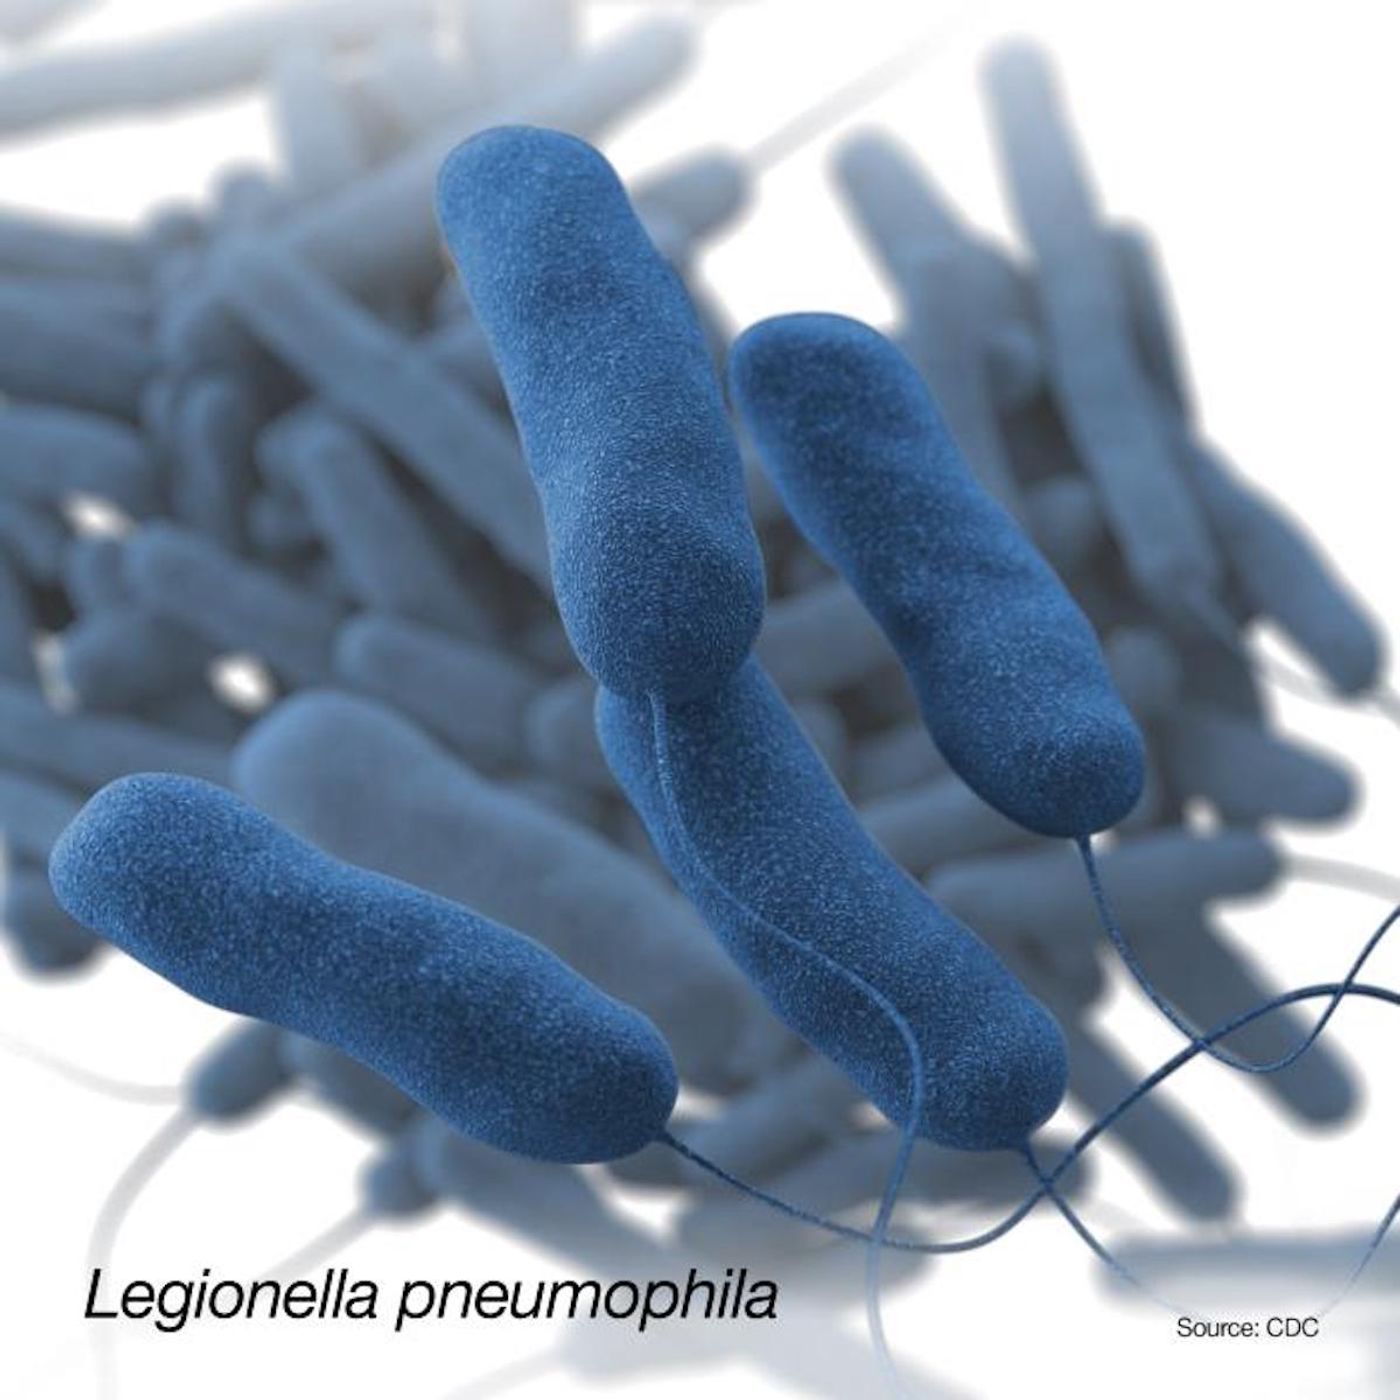 A 3D, computer-generated image of a group of Gram-negative Legionella pneumophila bacteria, based on scanning electron microscopic (SEM) imagery. / Credit: CDC/ Sarah Bailey Cutchin / Illustrator: Dan Higgins